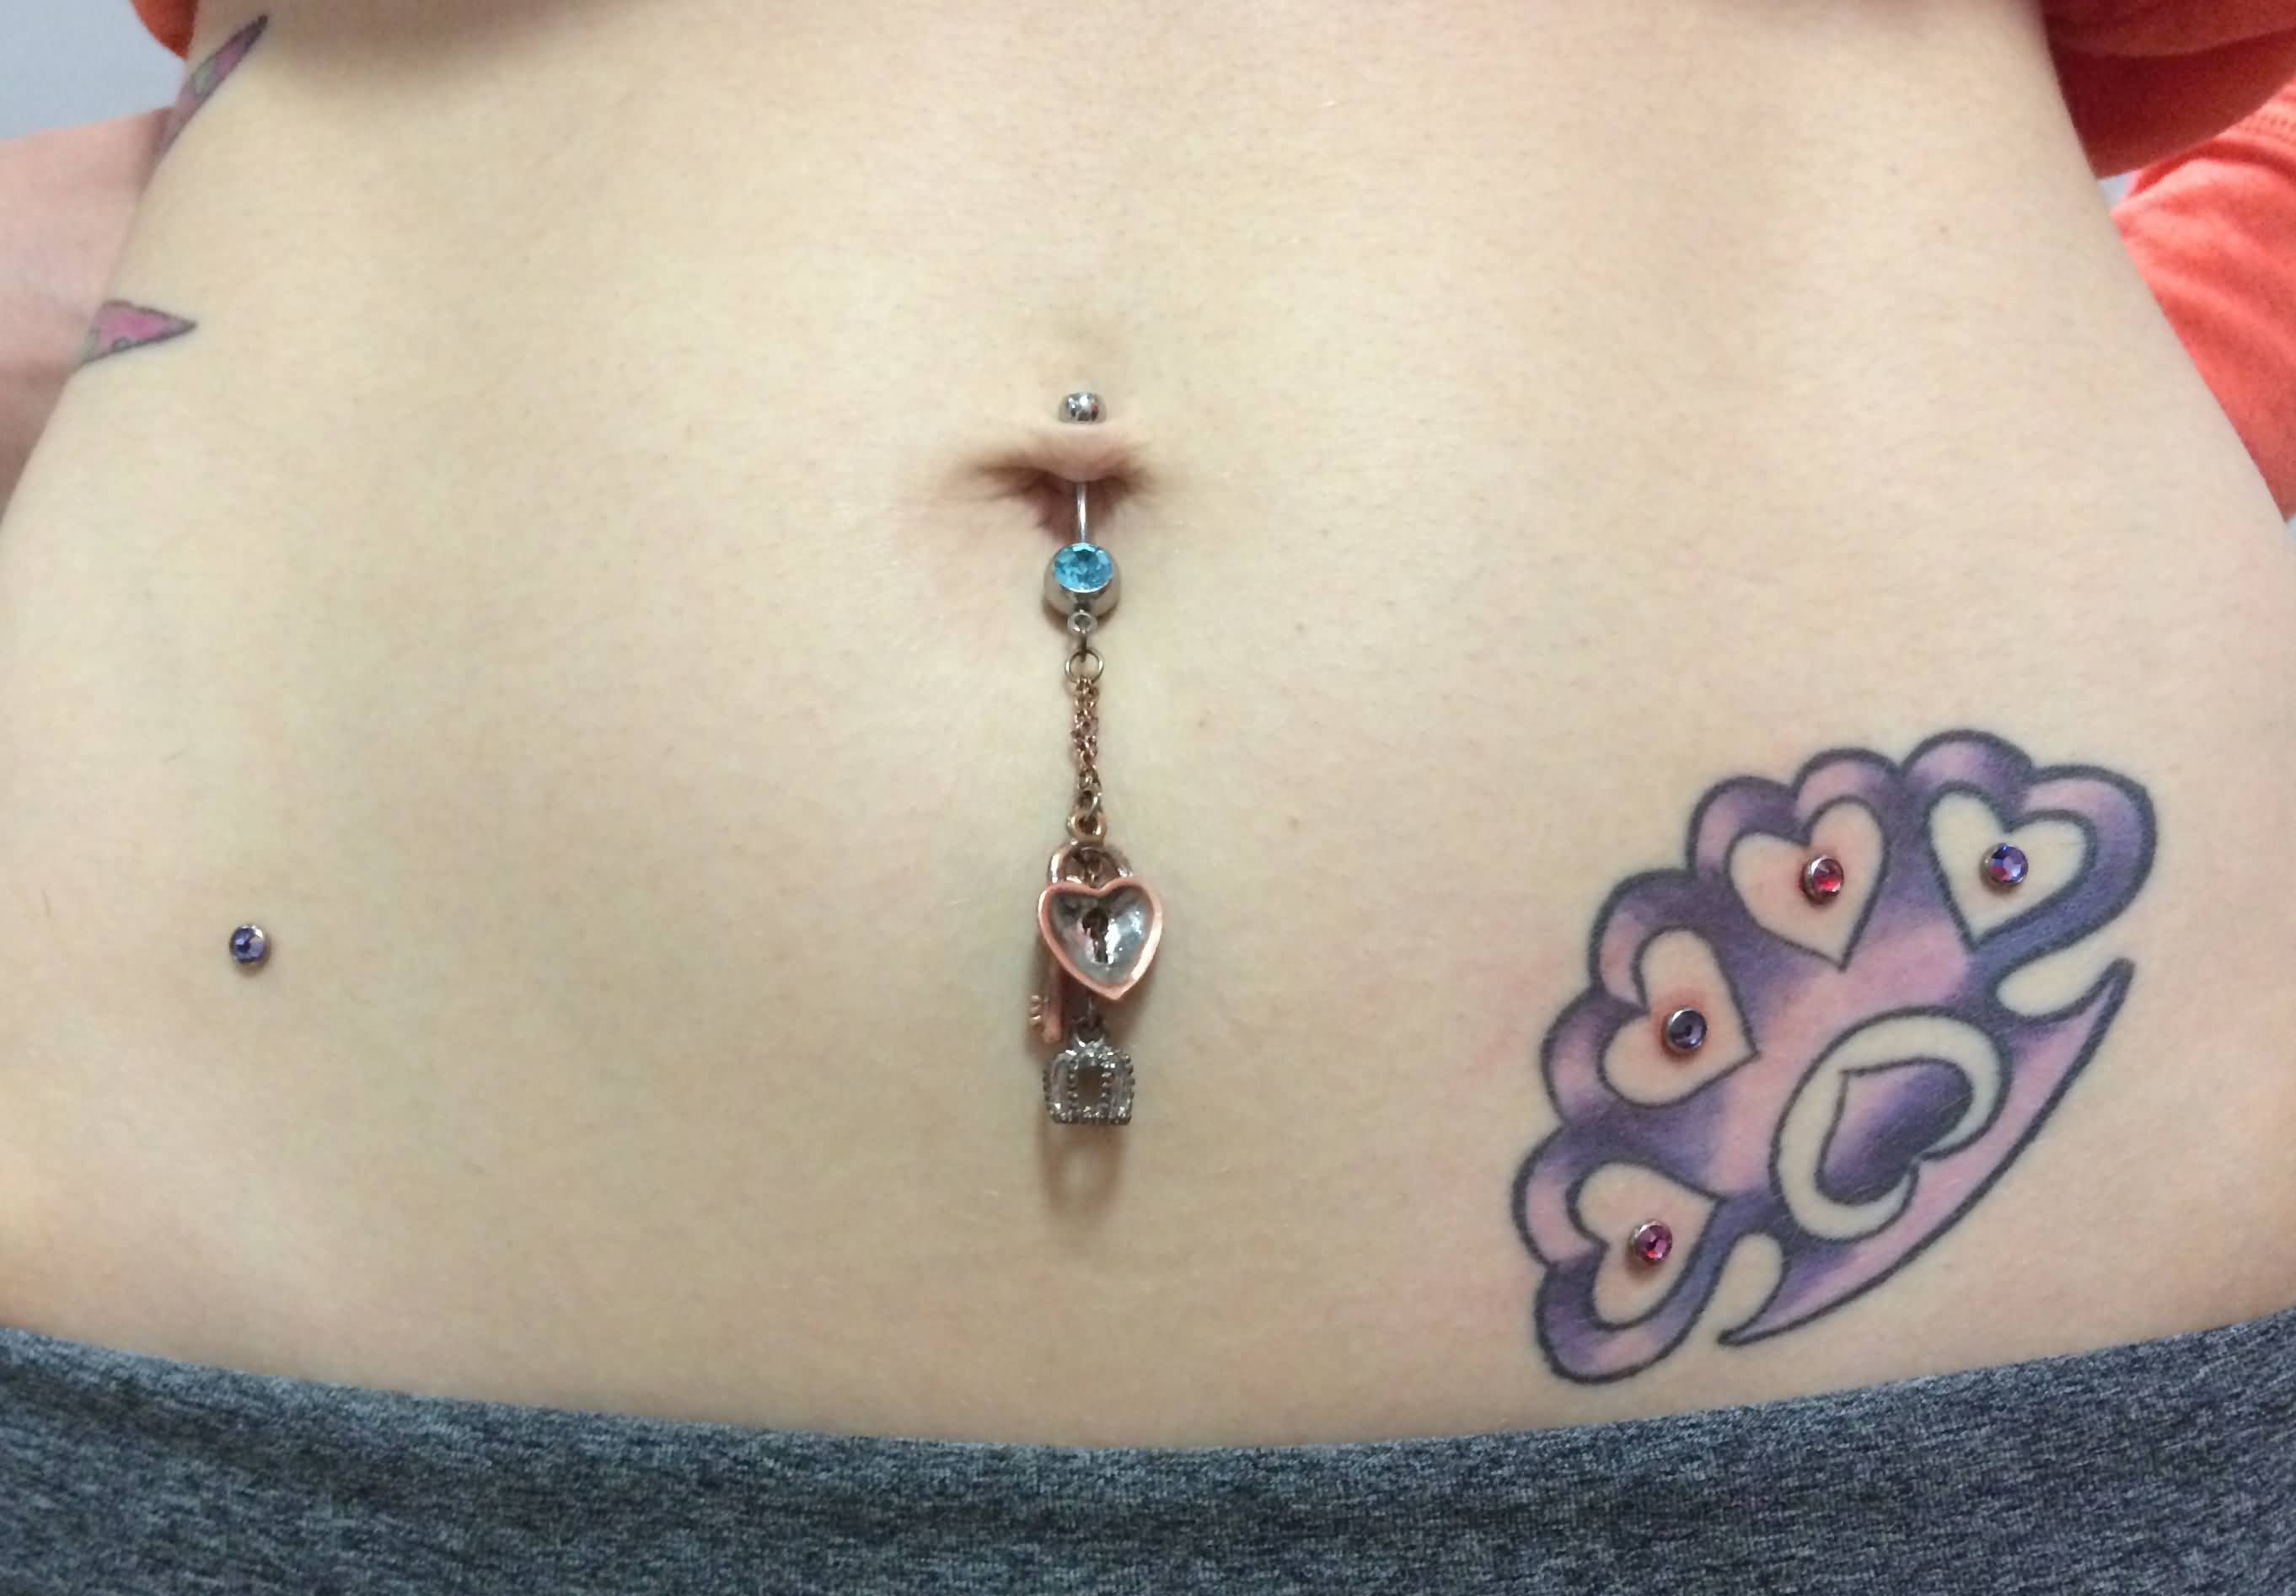 Knuckles Tattoo And Microdermal Hip Piercings Amazing Belly Piercing And Mi...